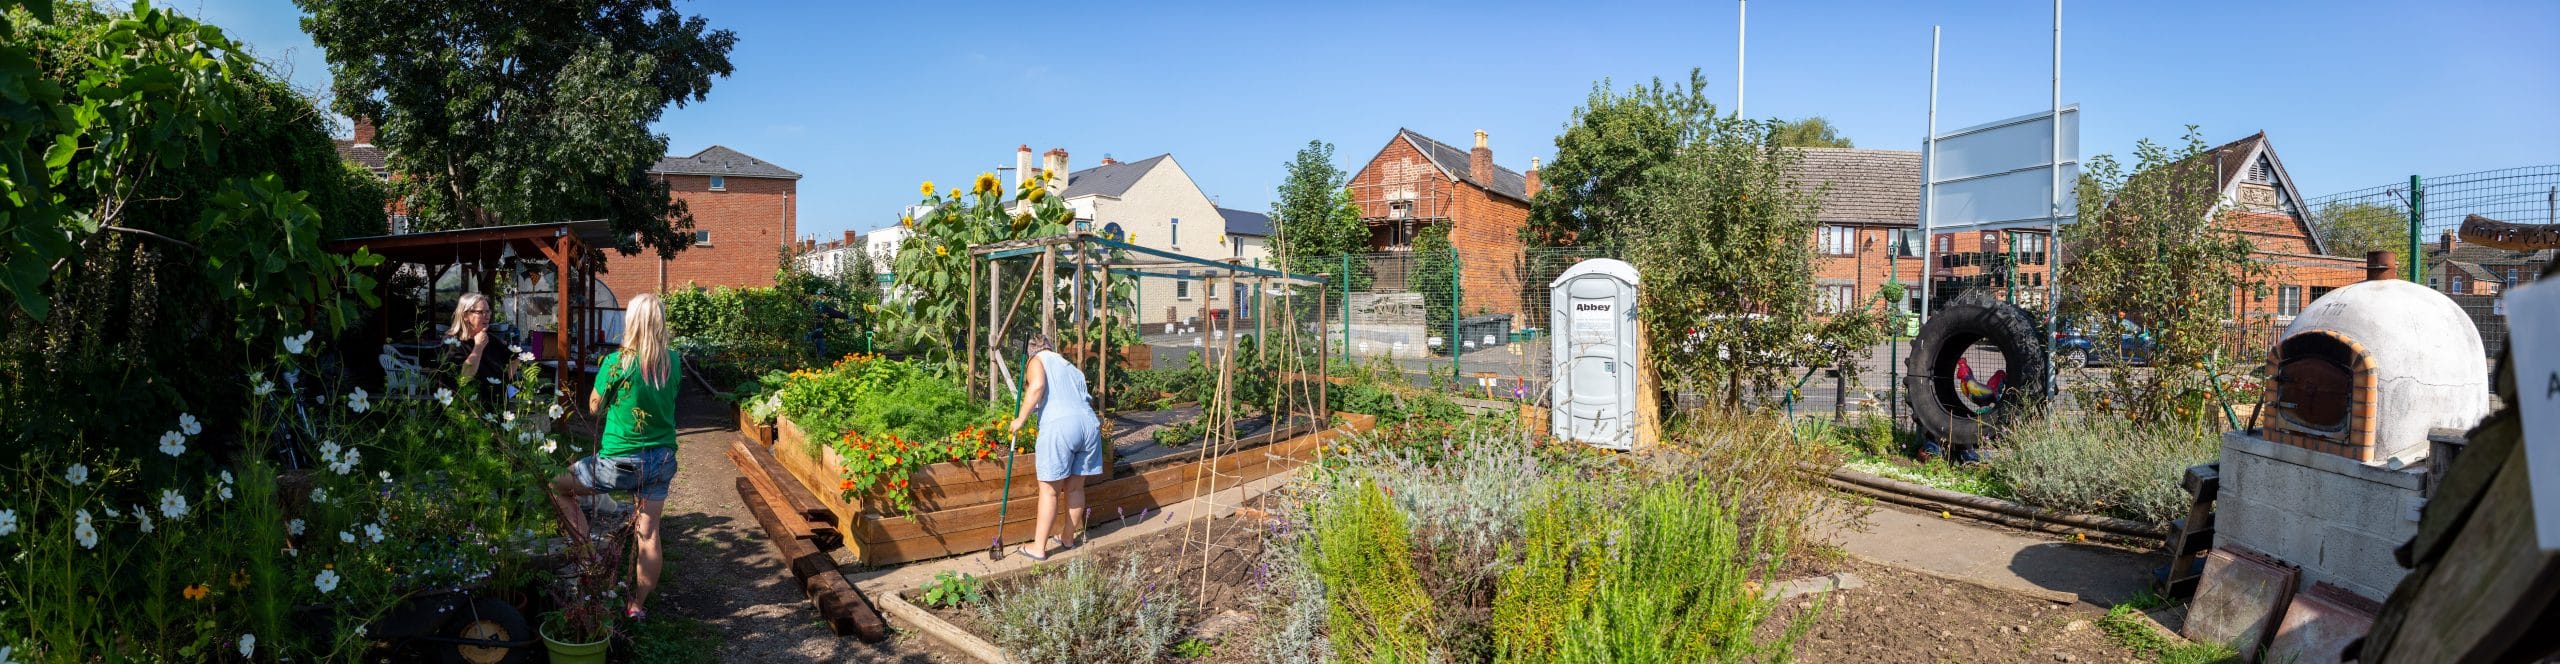 A panoramic image of urban allotments